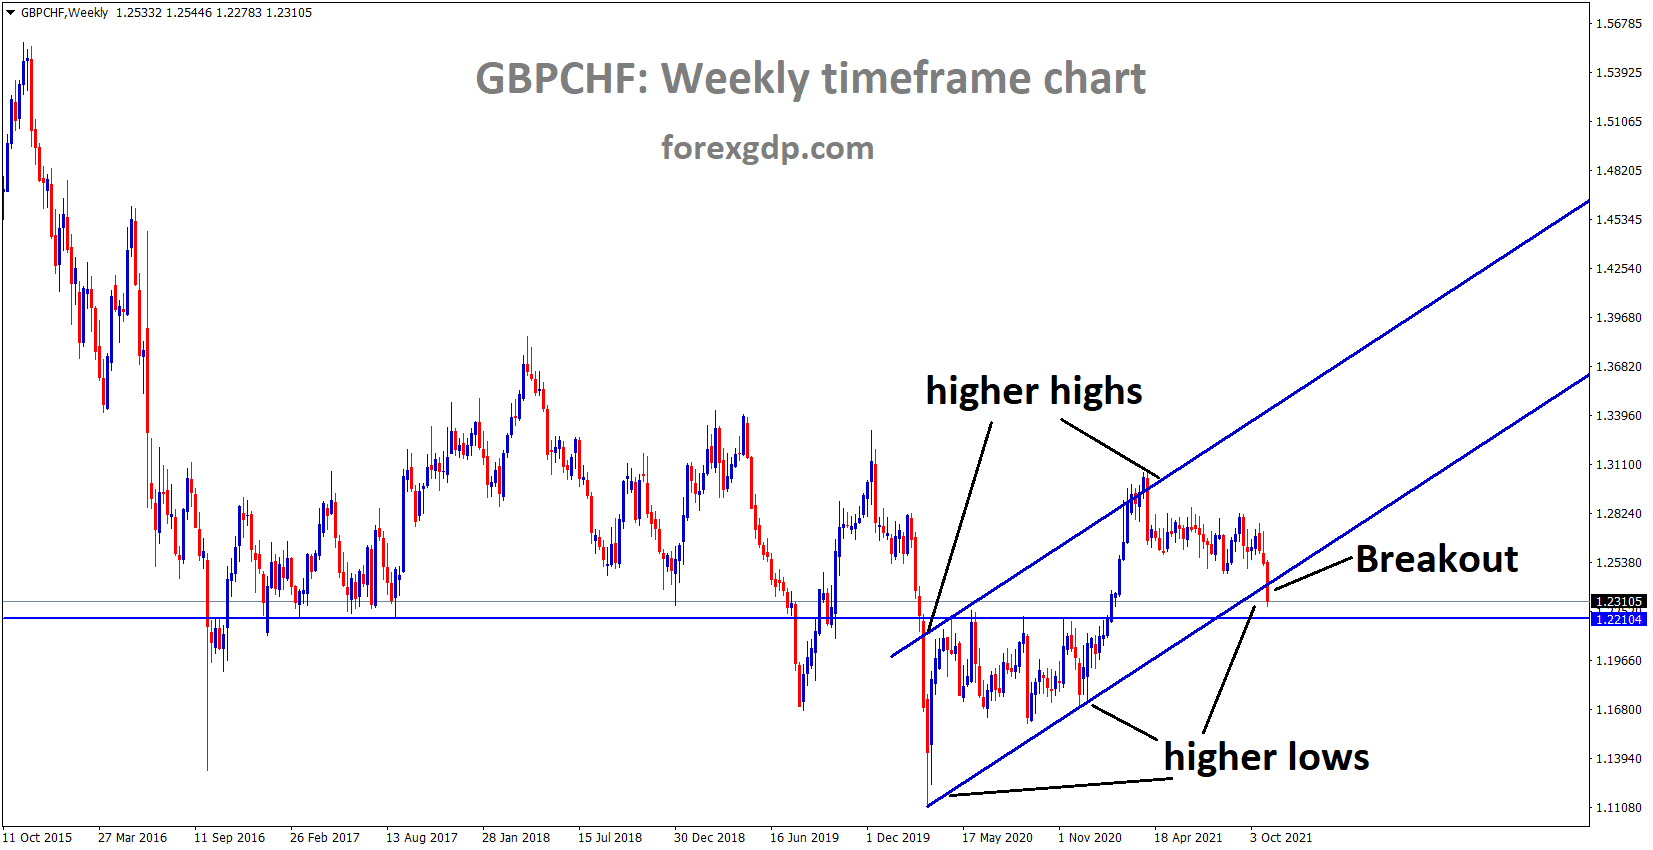 GBPCHF is moving in an Ascending channel and has broken the Ascending channel